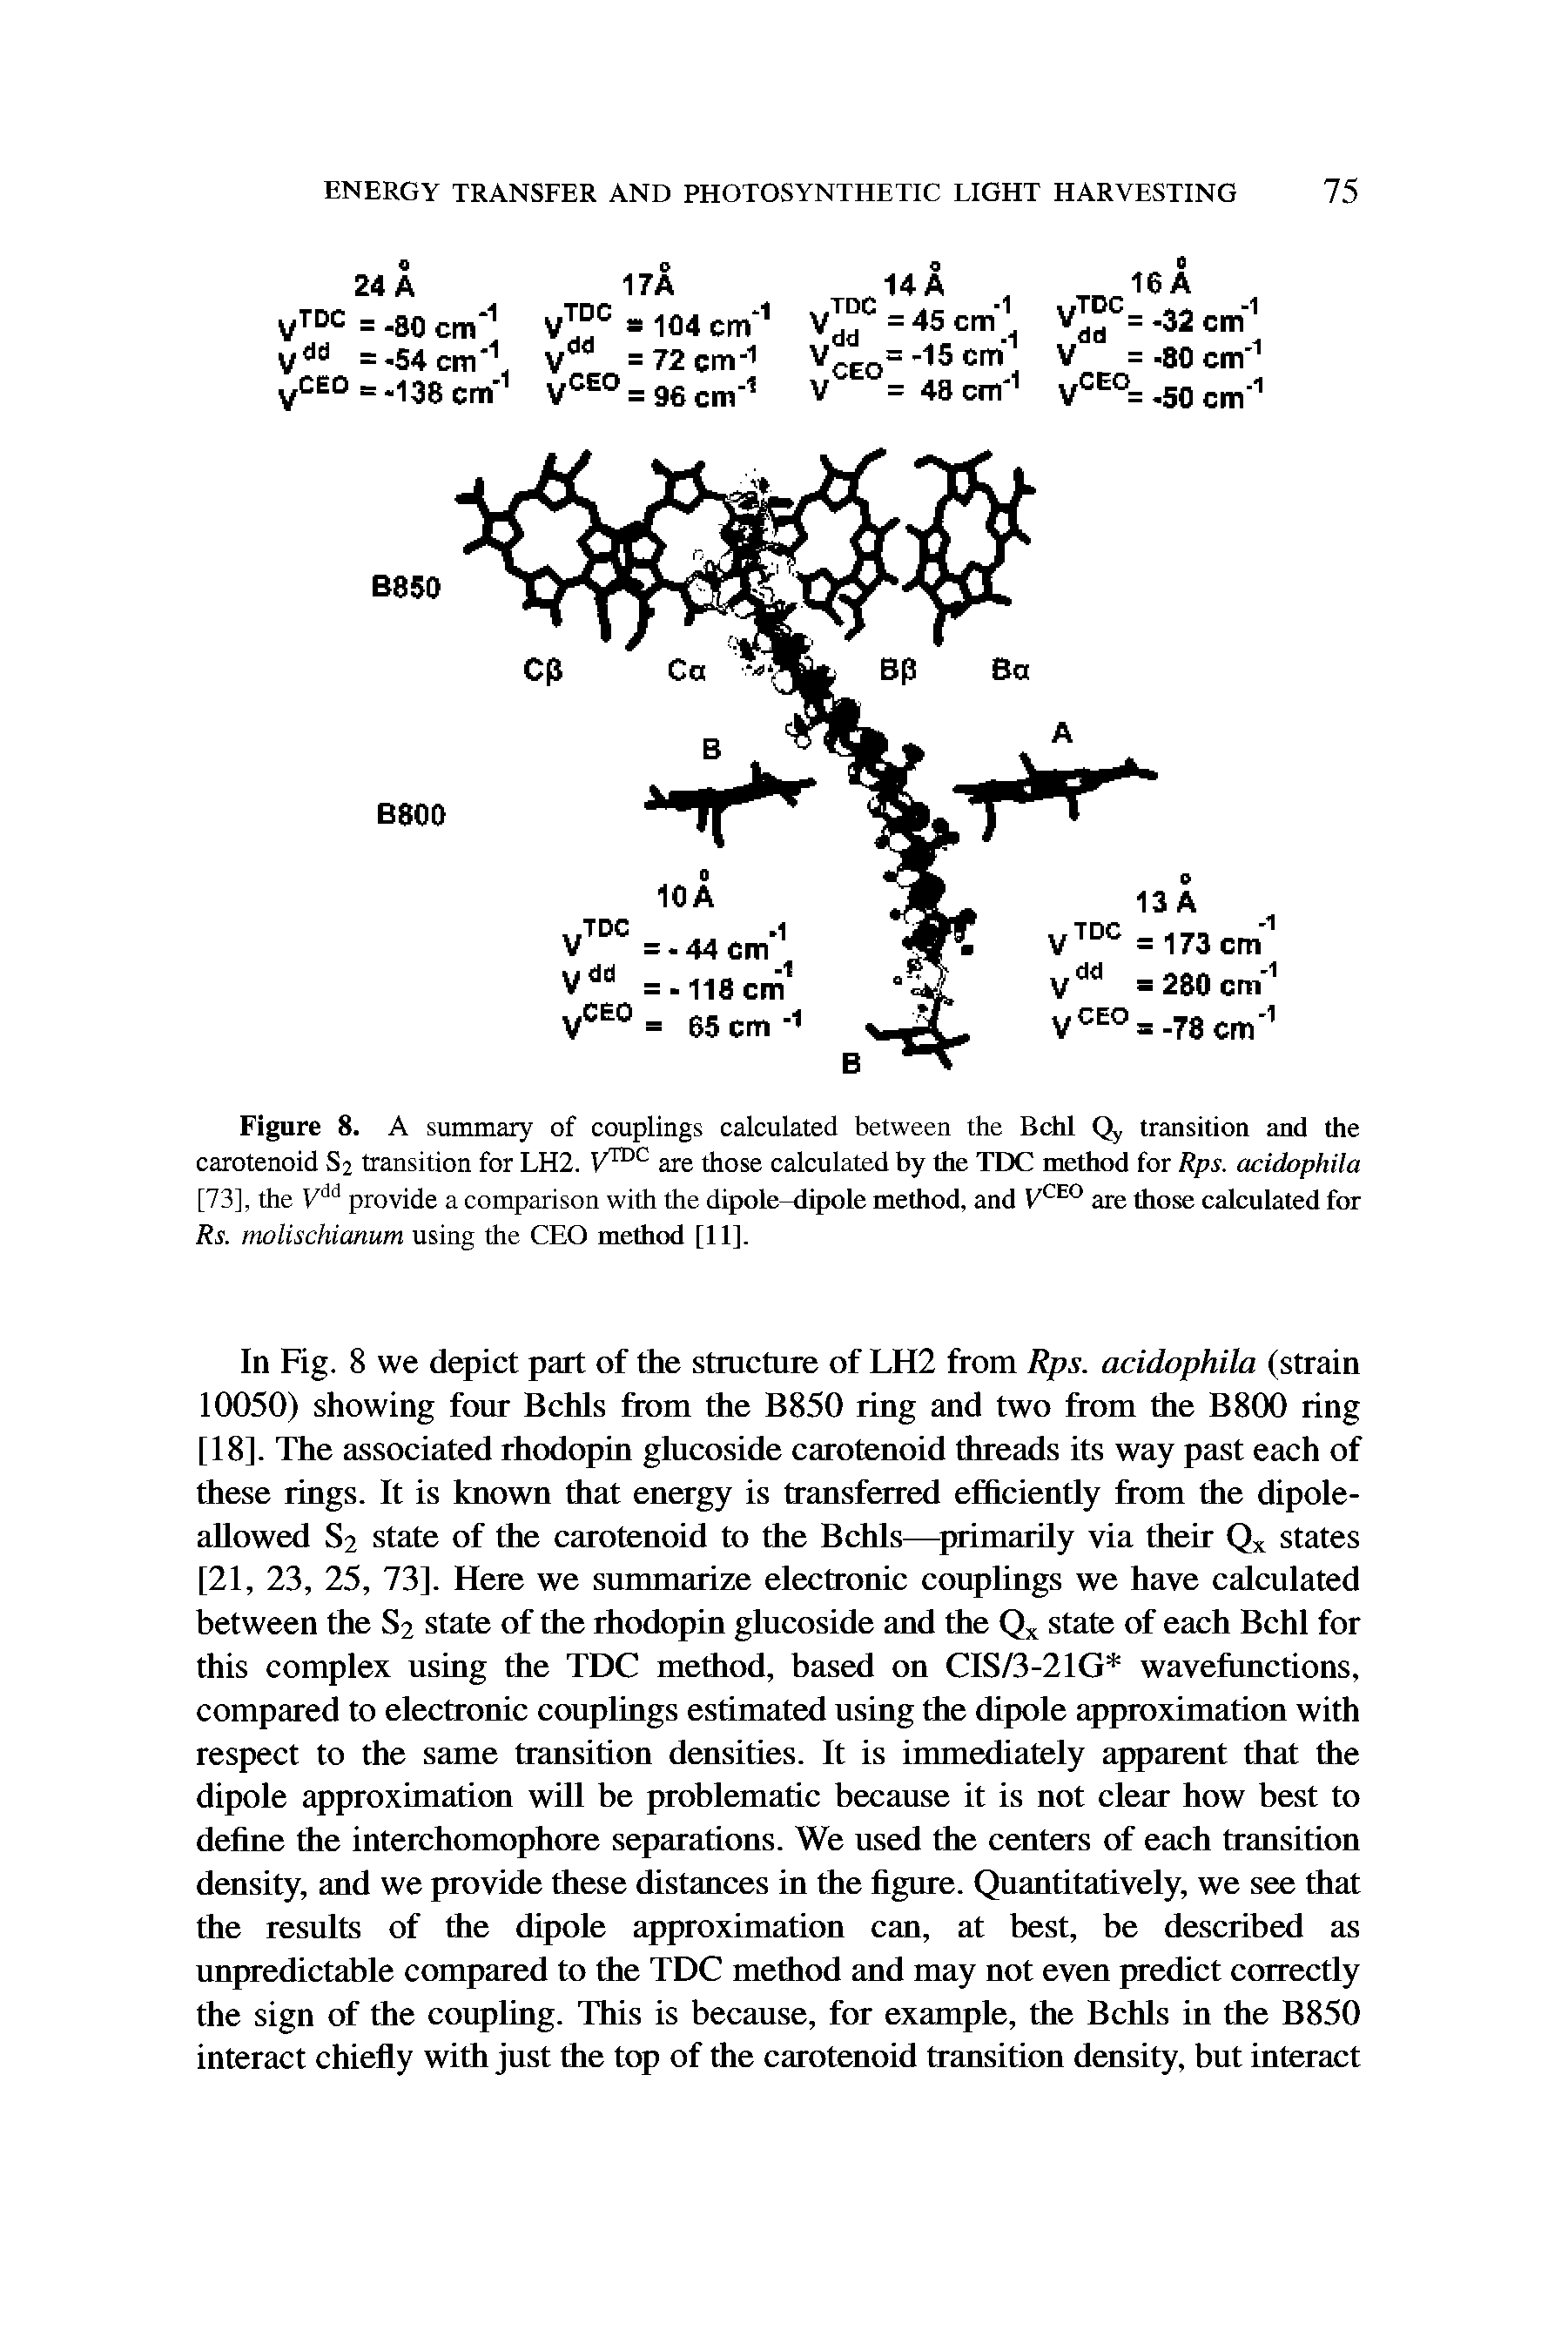 Figure 8. A summary of couplings calculated between the Bchl Qy transition and the carotenoid S2 transition for LH2. are those calculated by the TEXT method for Rps. acidophila [73], the provide a comparison with the dipole-dipole method, and V - are those calculated for Rs. molischianum using the CEO method [11],...